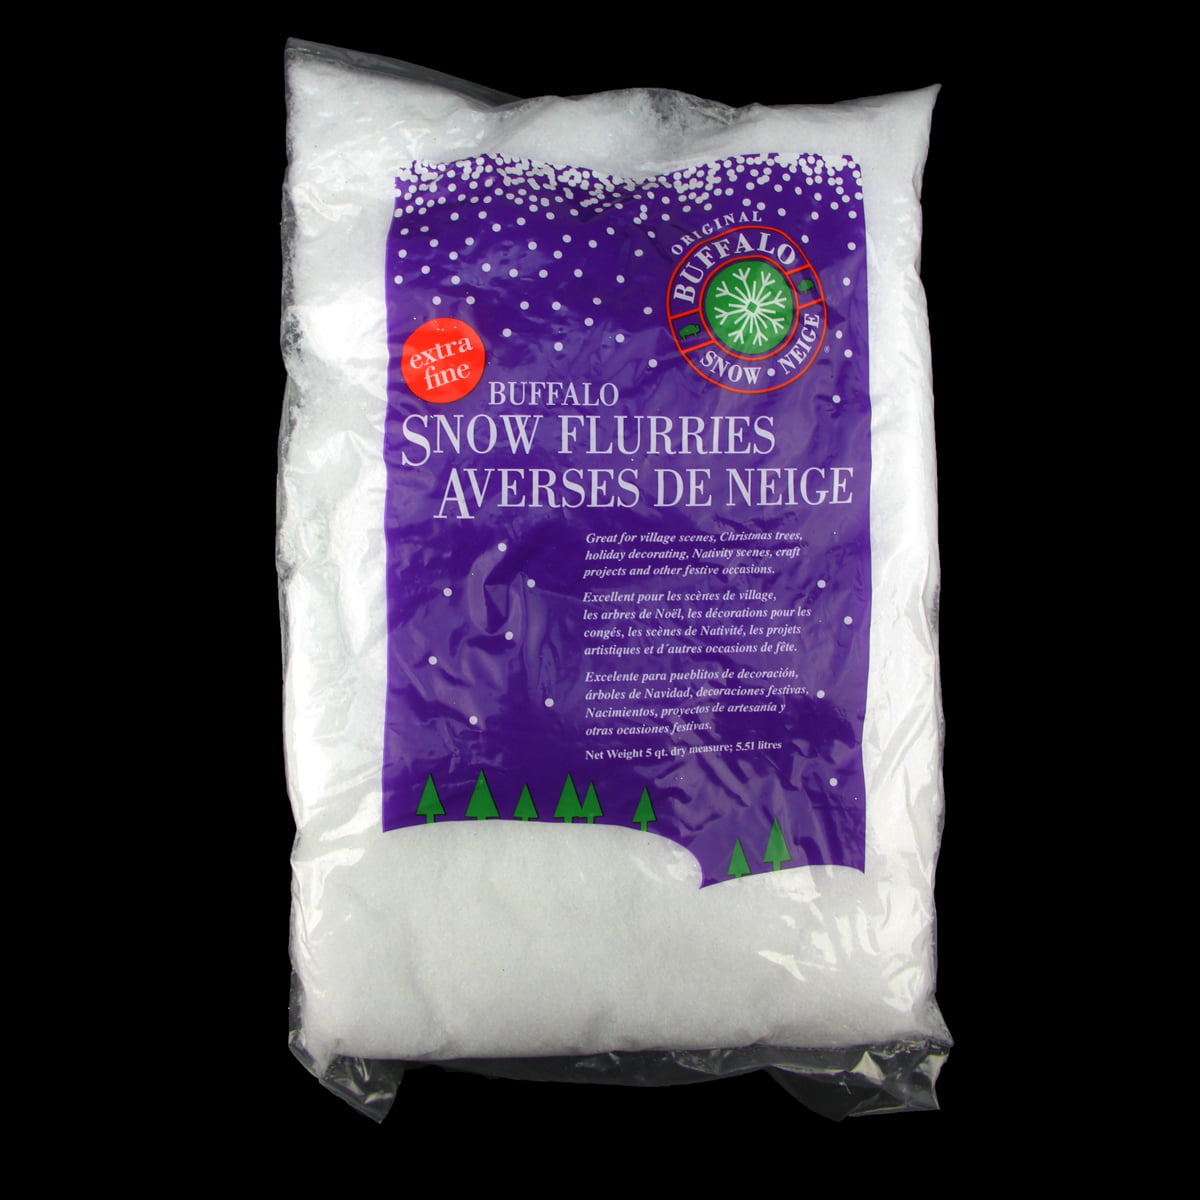 EXTRA FINE MADE IN THE USA NEW BUFFALO SNOW FLURRIES ARTIFICIAL SNOW 5 QT 